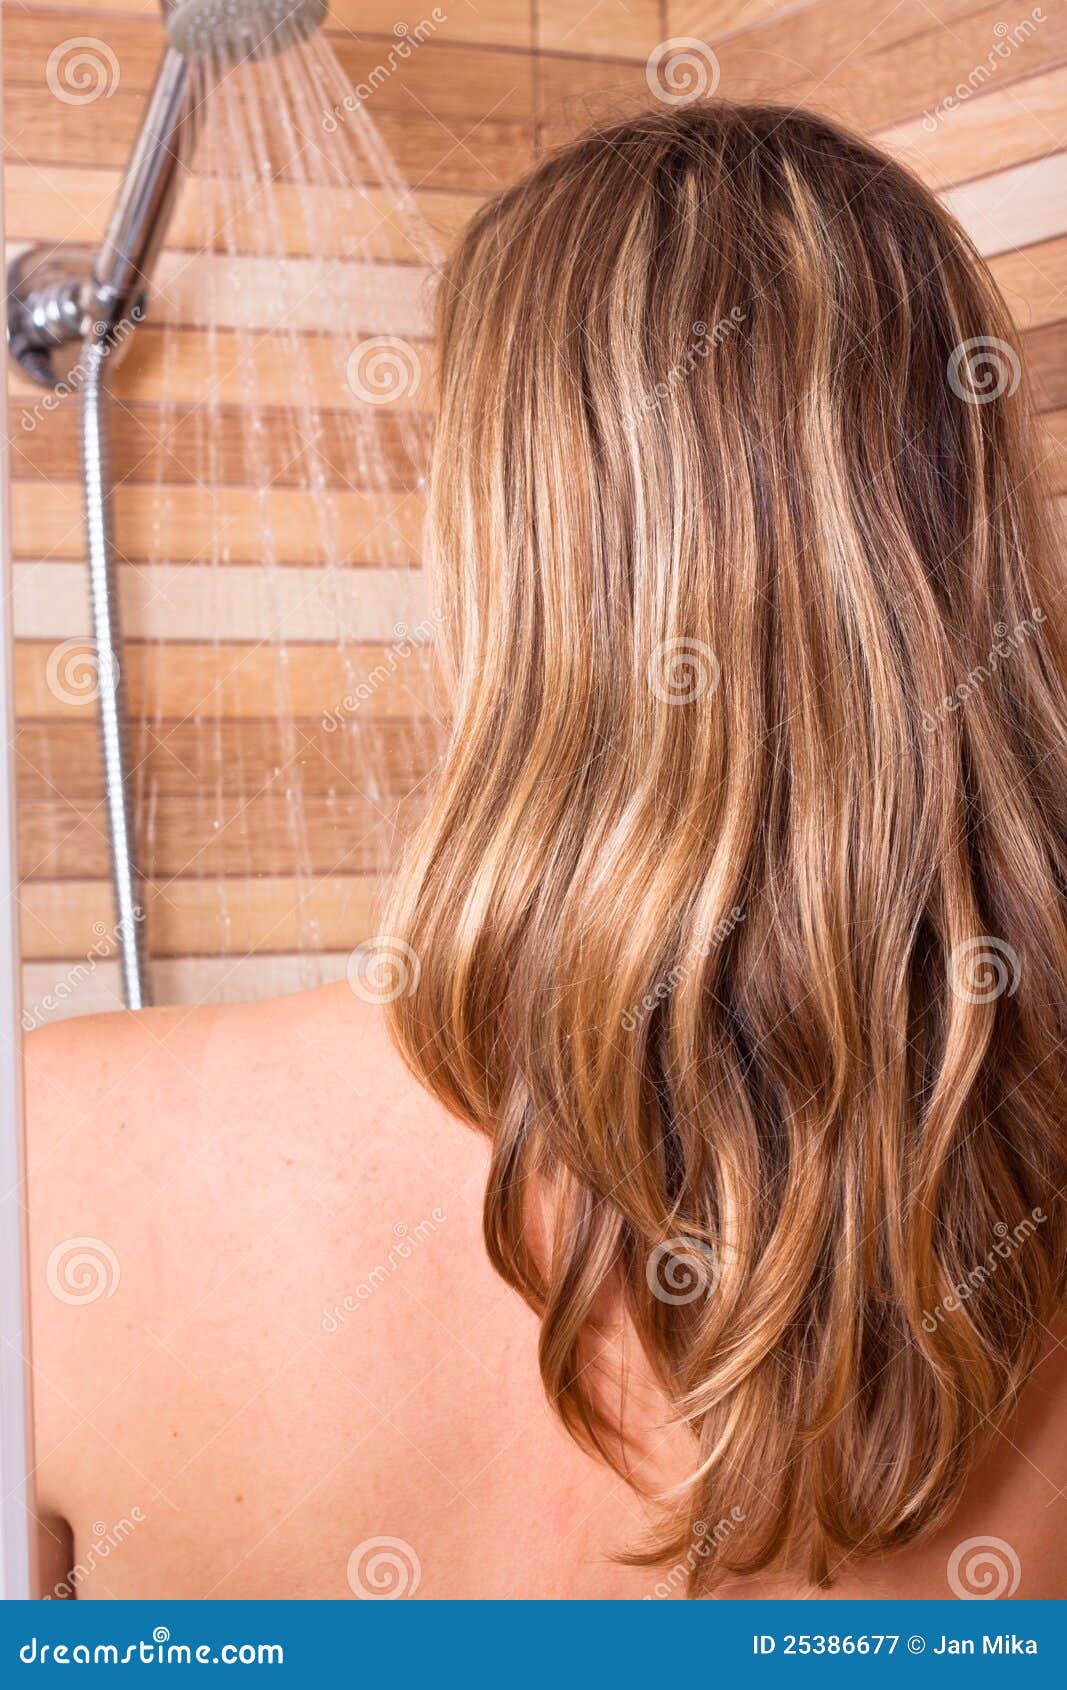 Woman With Highlighted Hair In Shower Stock Image - Image 